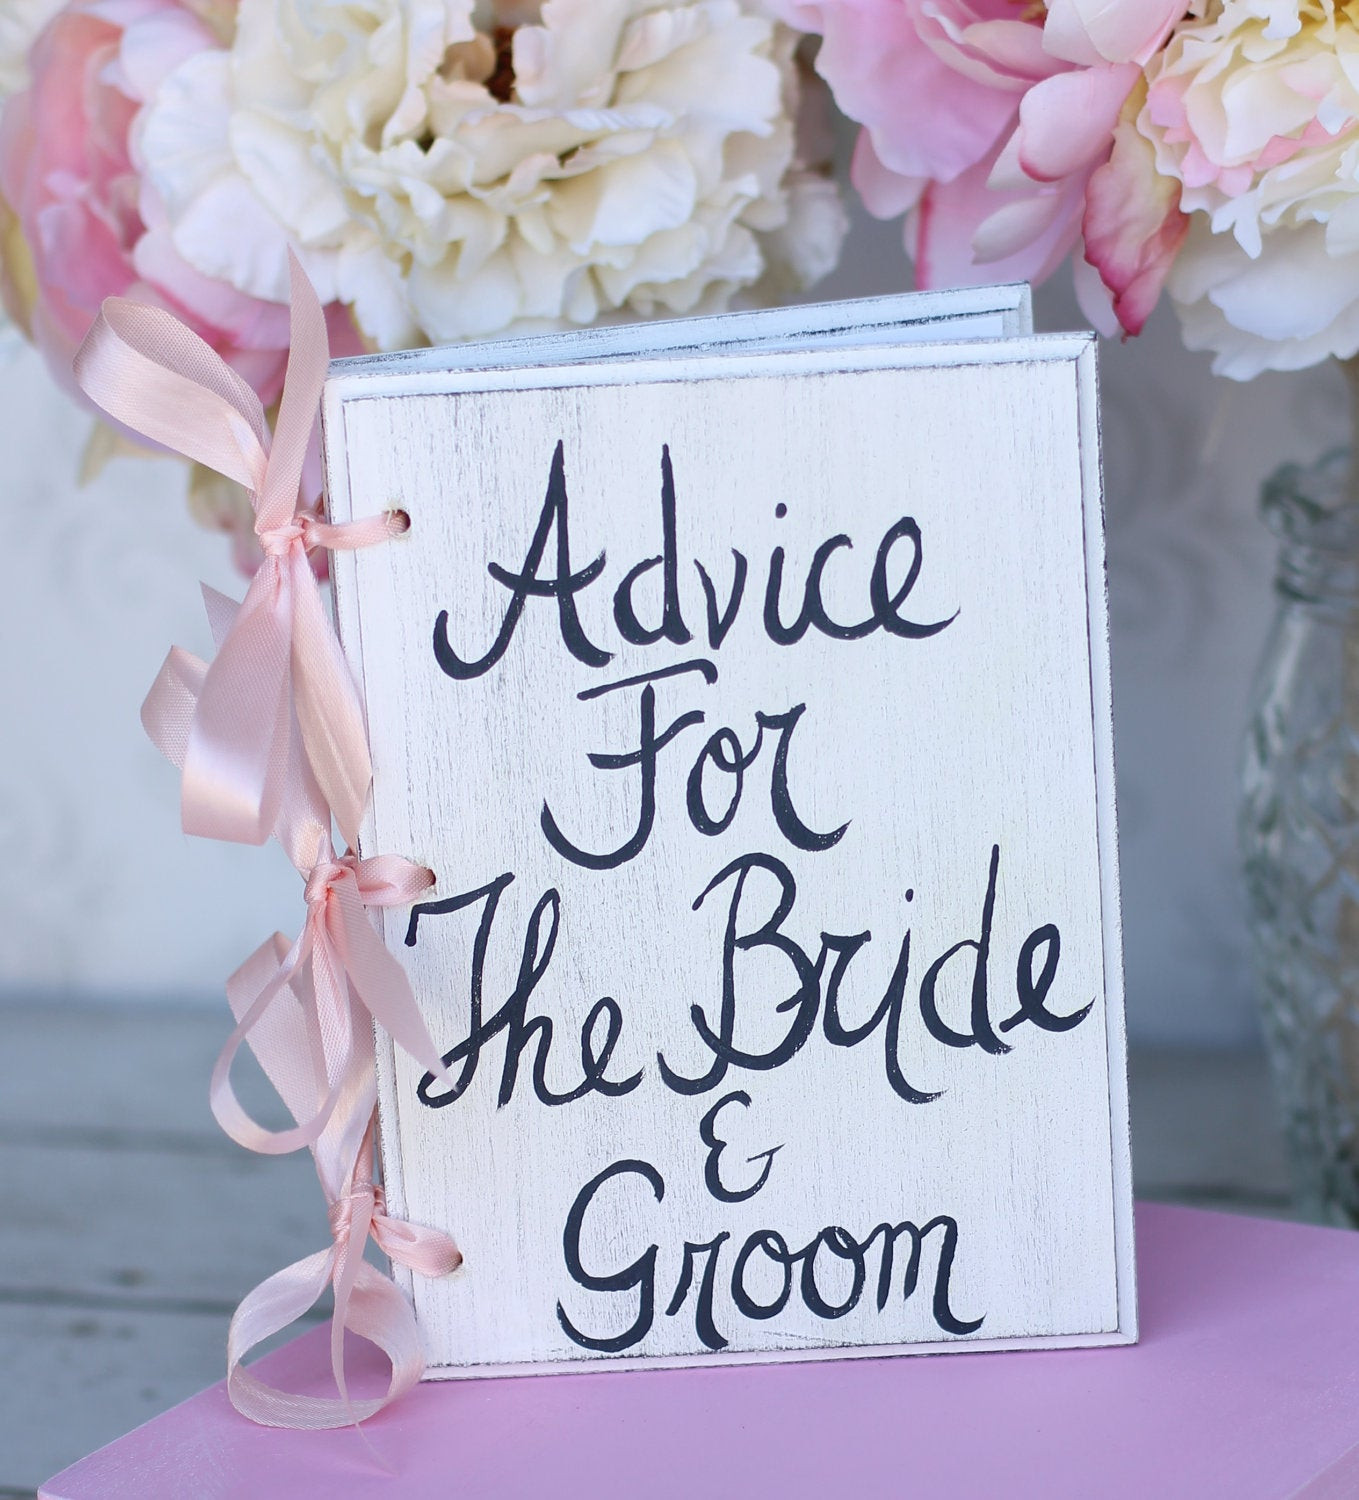 Shabby Chic Wedding Guest Book
 Wedding Guest Book Shabby Chic Decor Advice For by